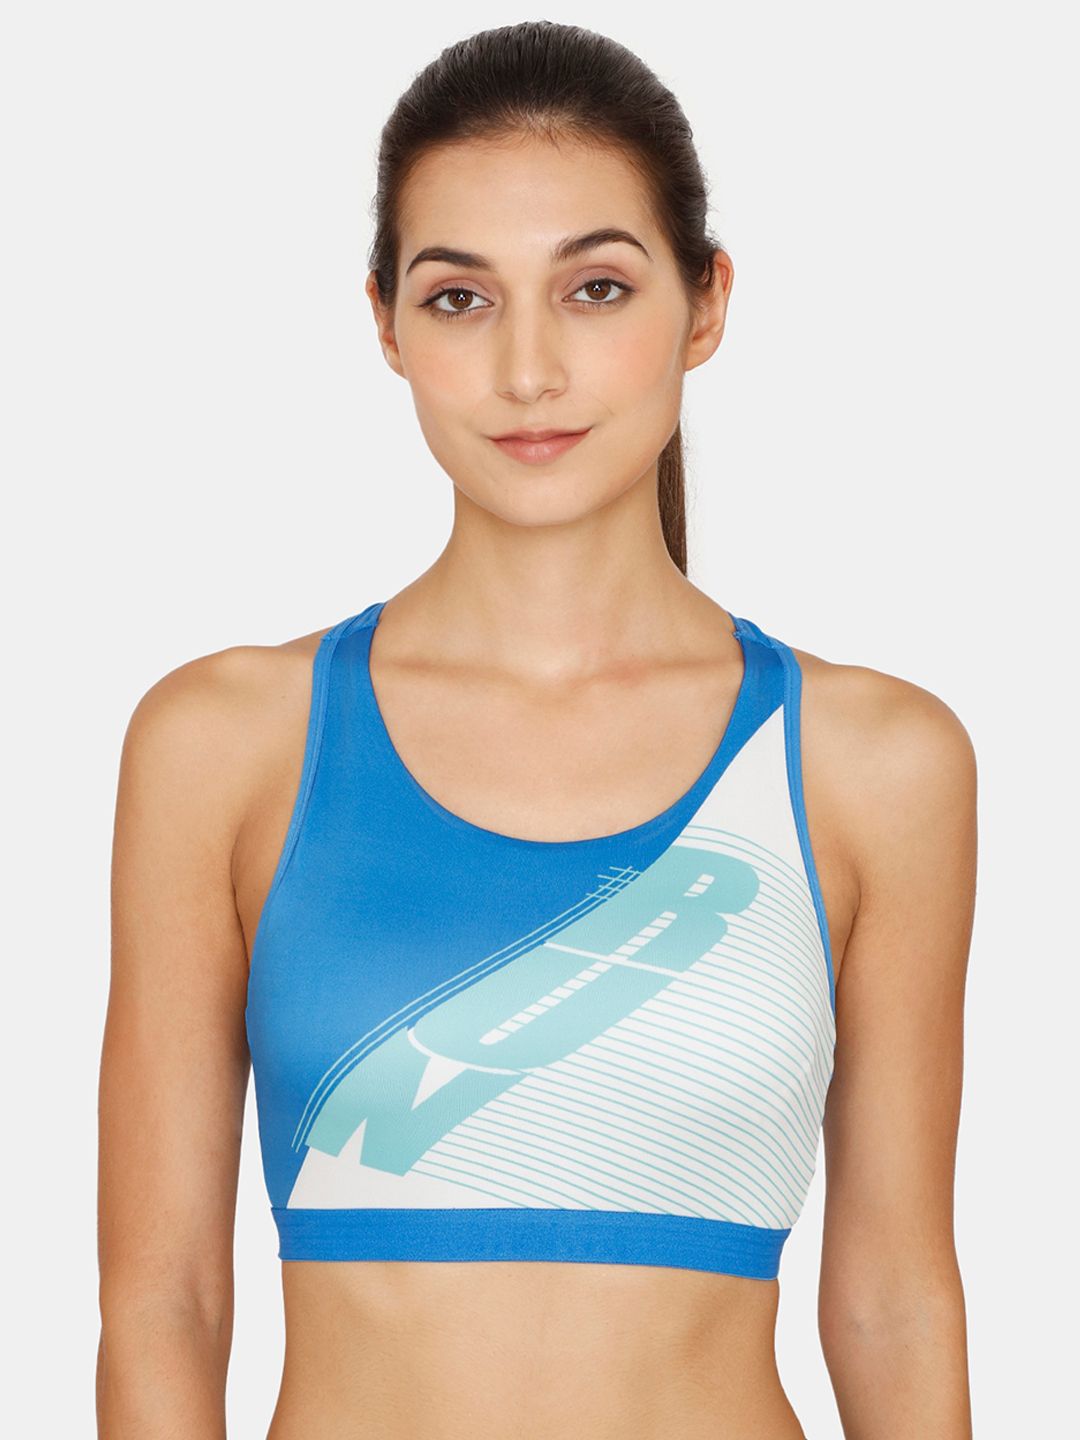 Zelocity by Zivame Blue & White Non-Wired Sports Bra Price in India